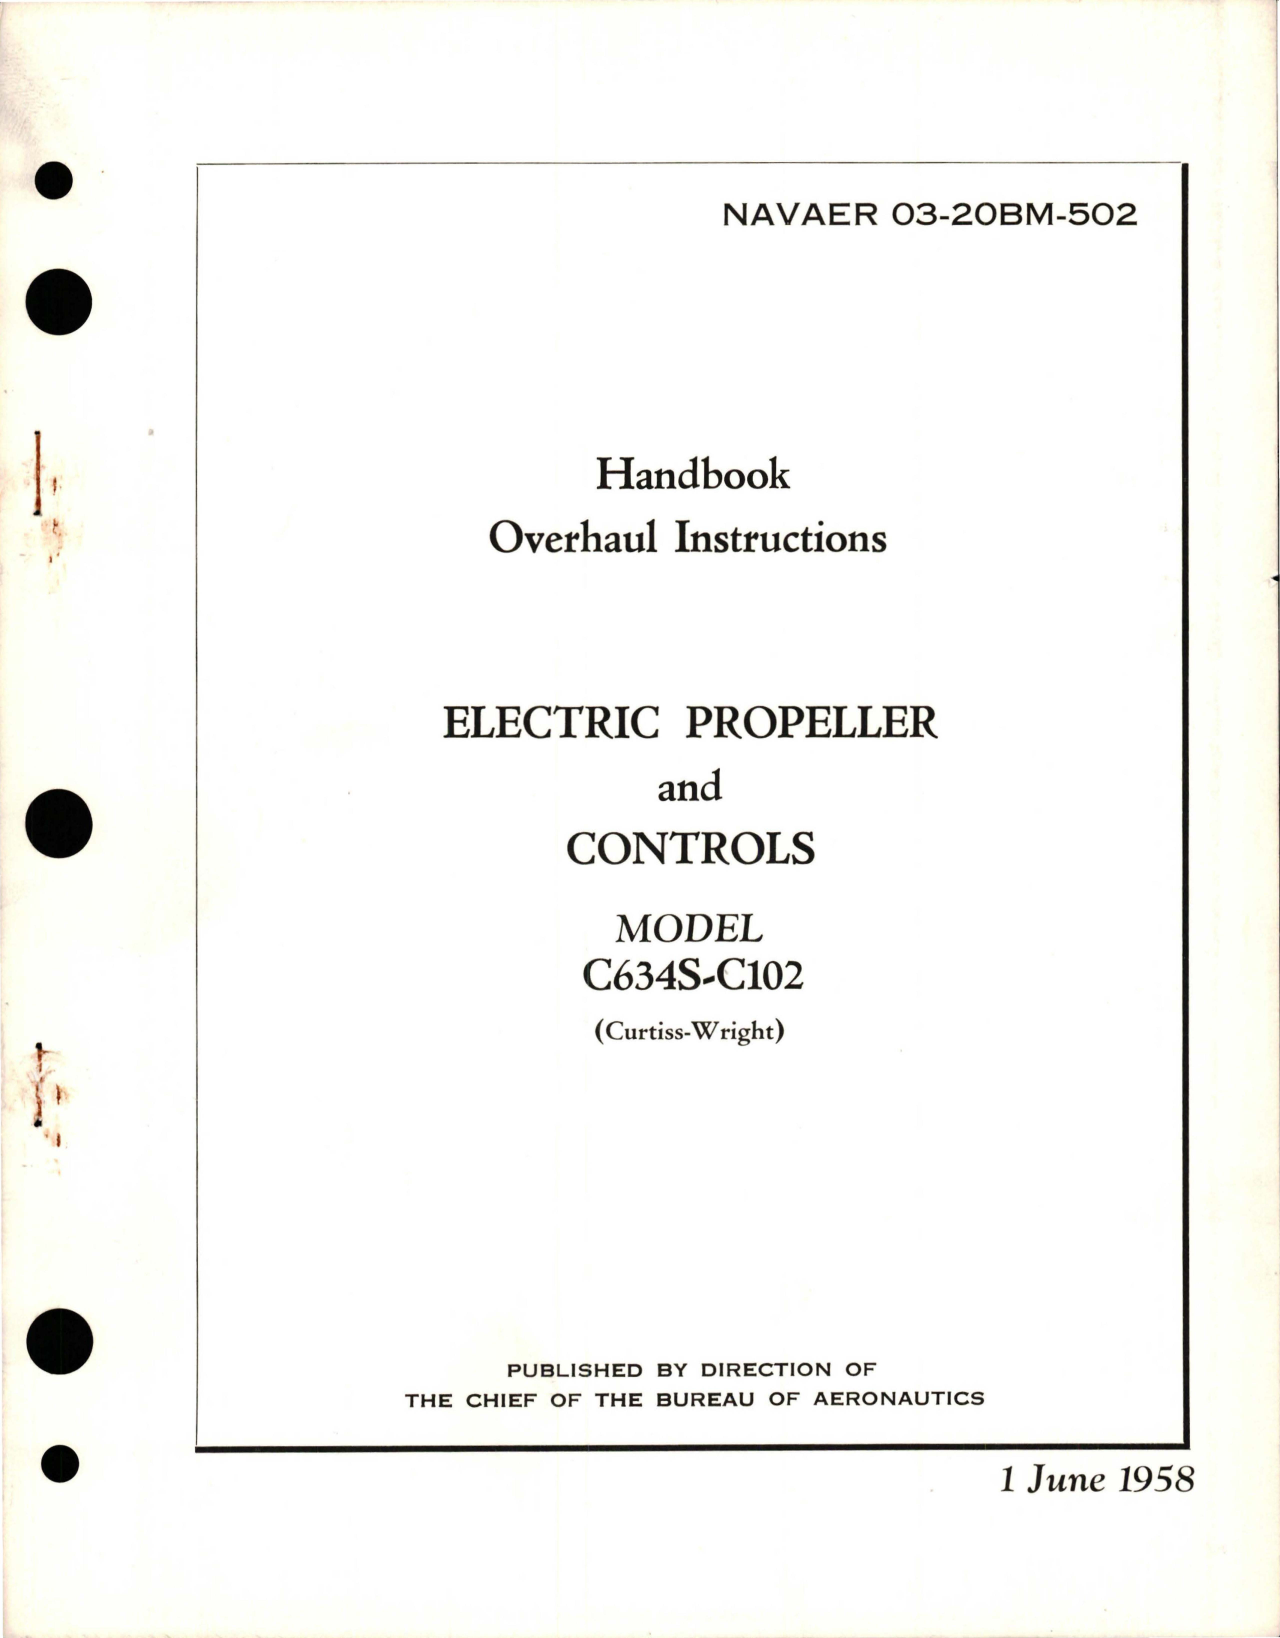 Sample page 1 from AirCorps Library document: Overhaul Instructions for Electric Propeller and Controls - Model C634S-C102